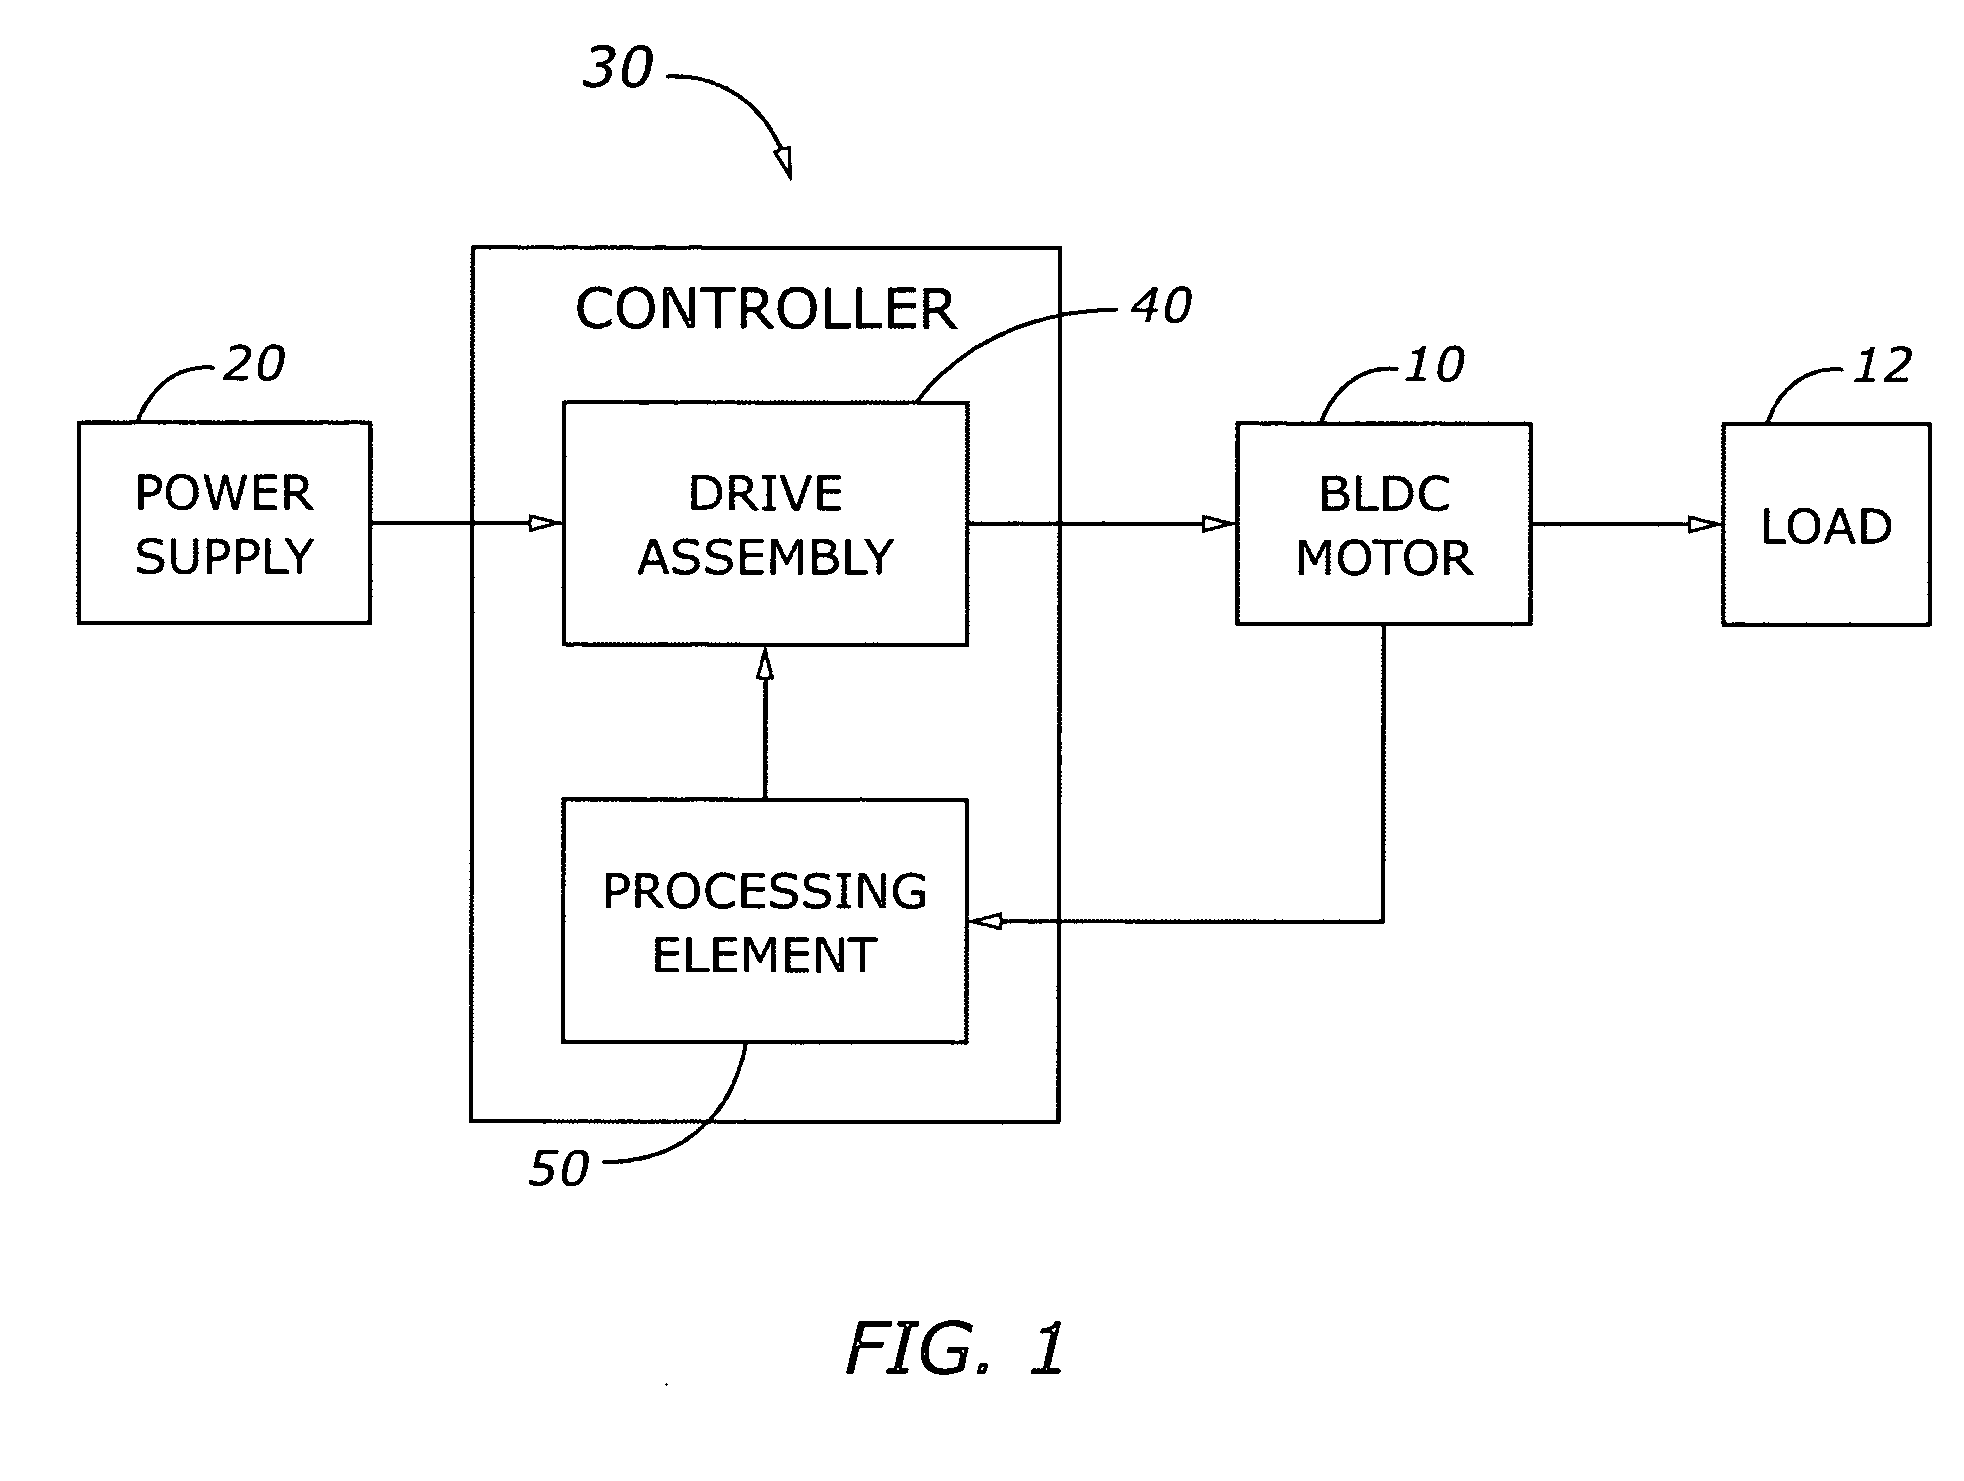 Power sharing high frequency motor drive modular system